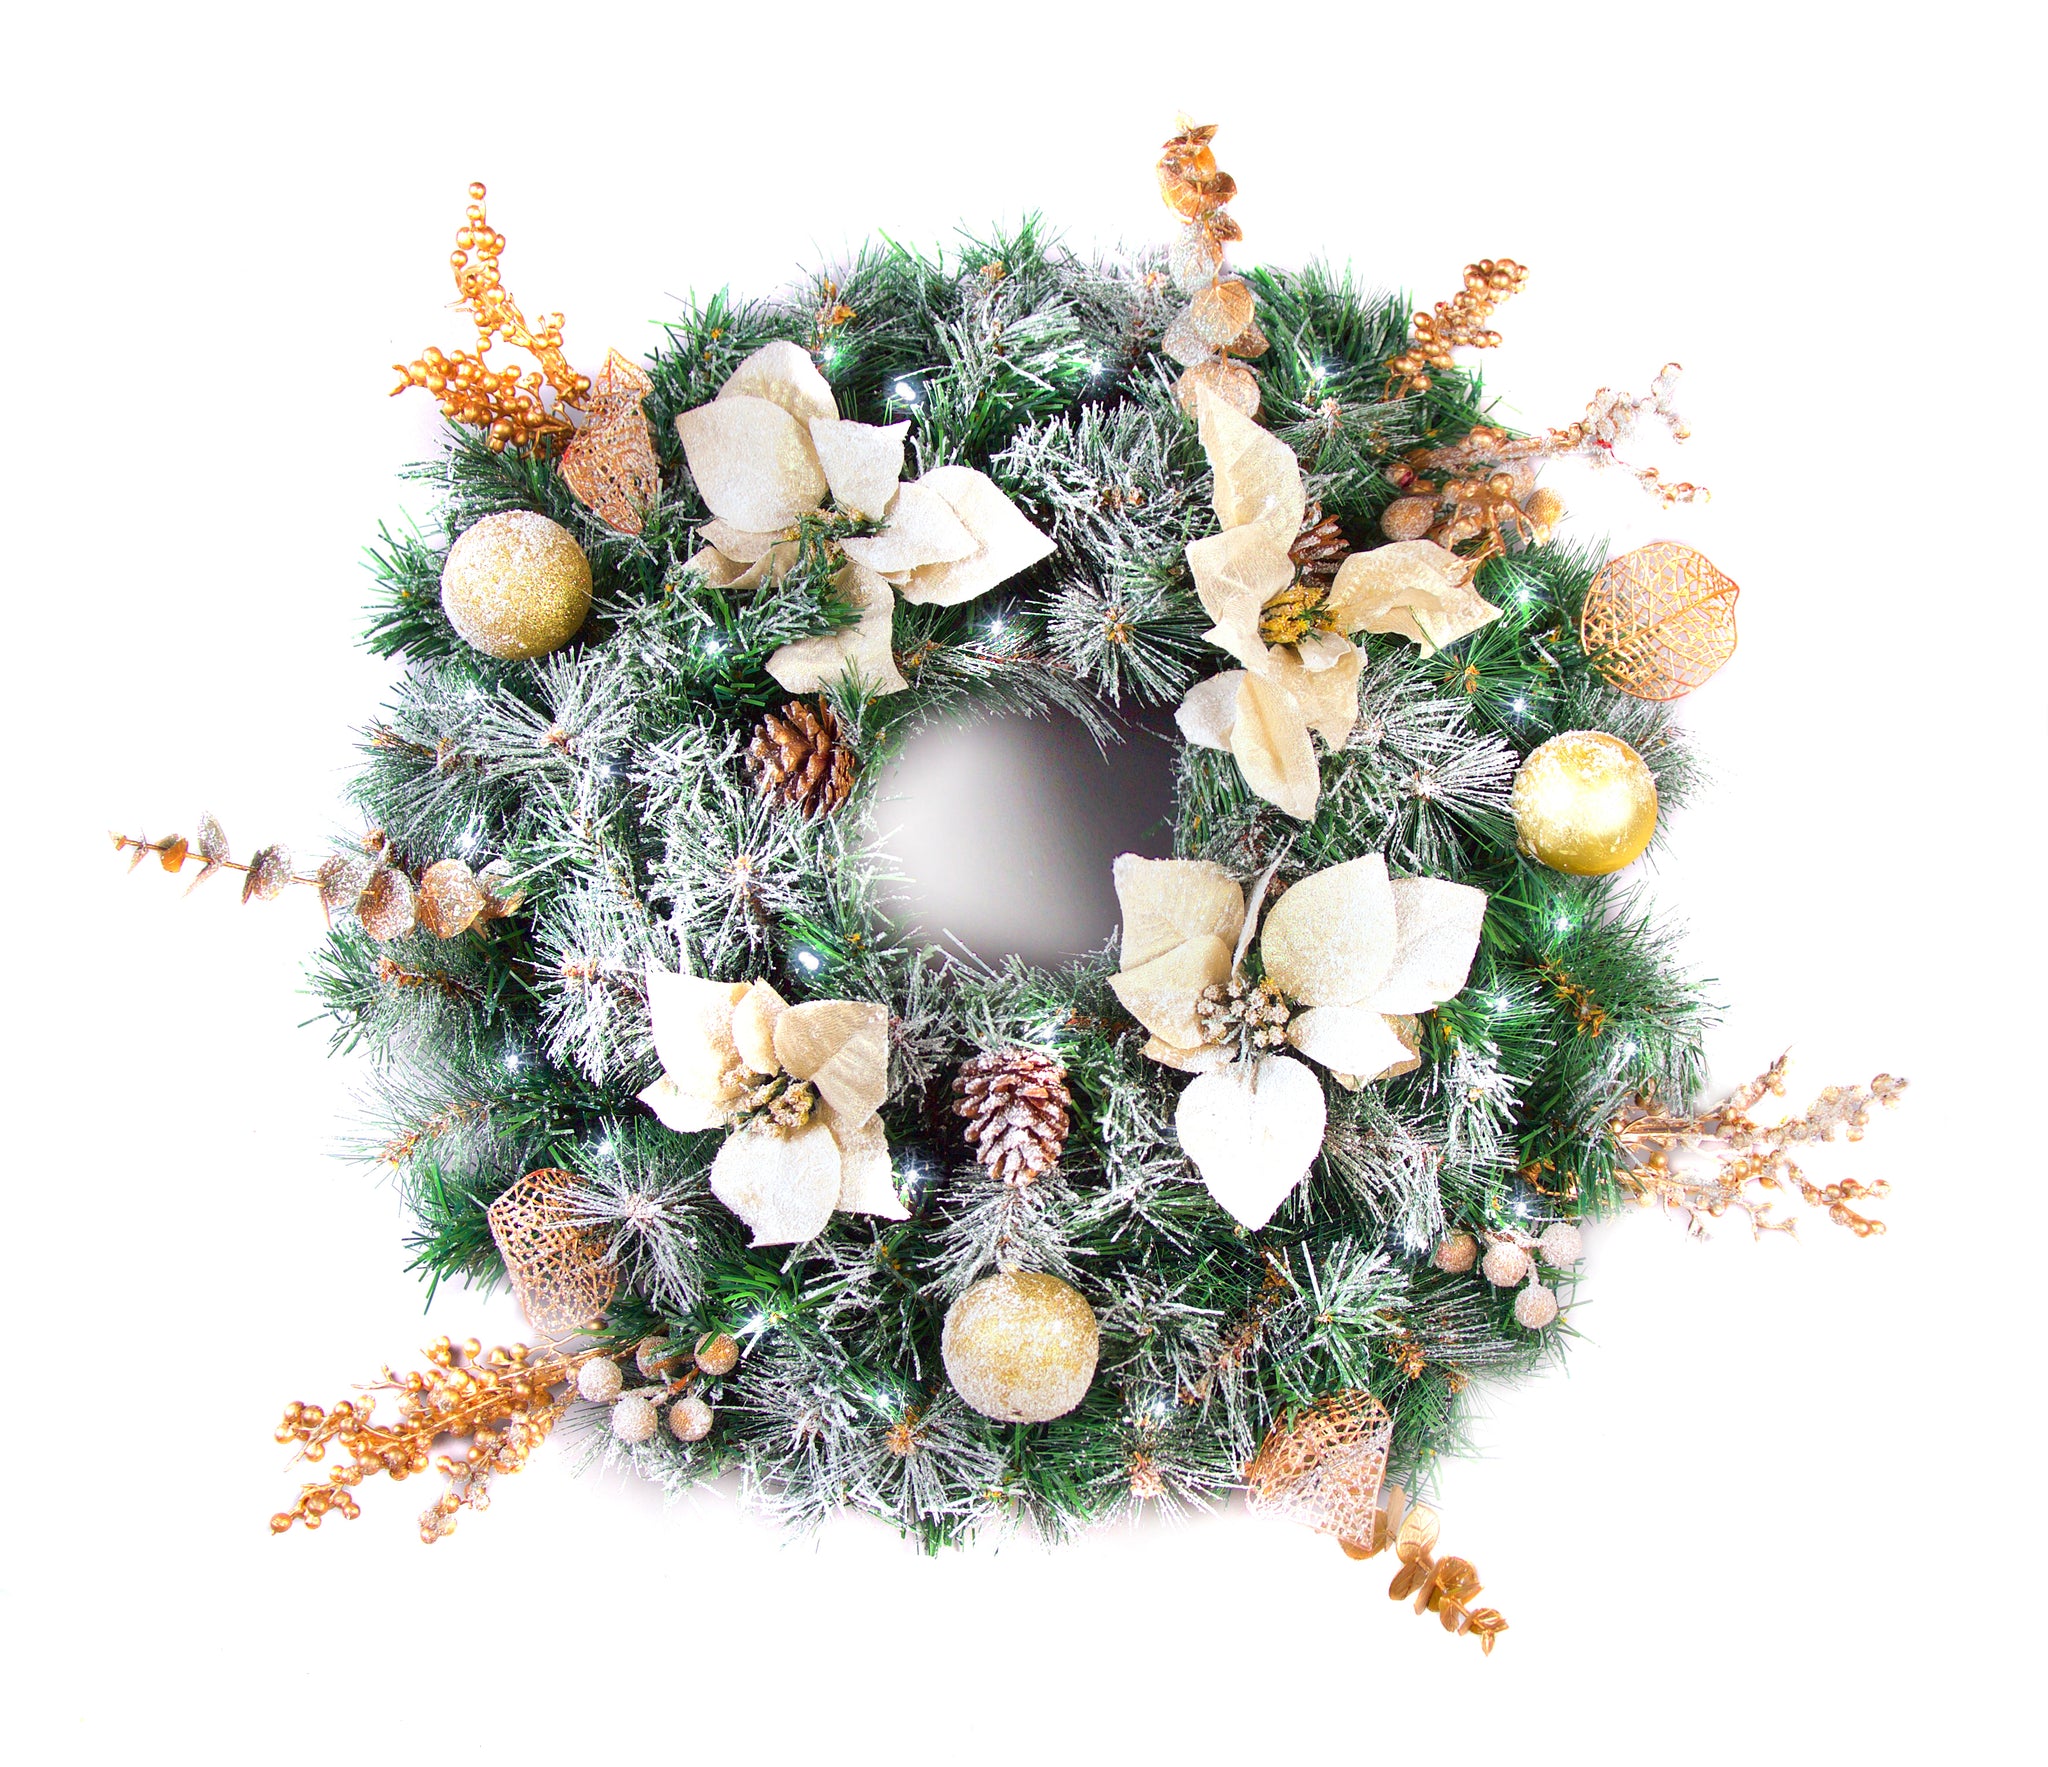 Best Artificial Christmas Pre-Lit 60cm Frosted Gold or Red Decorated Wreath